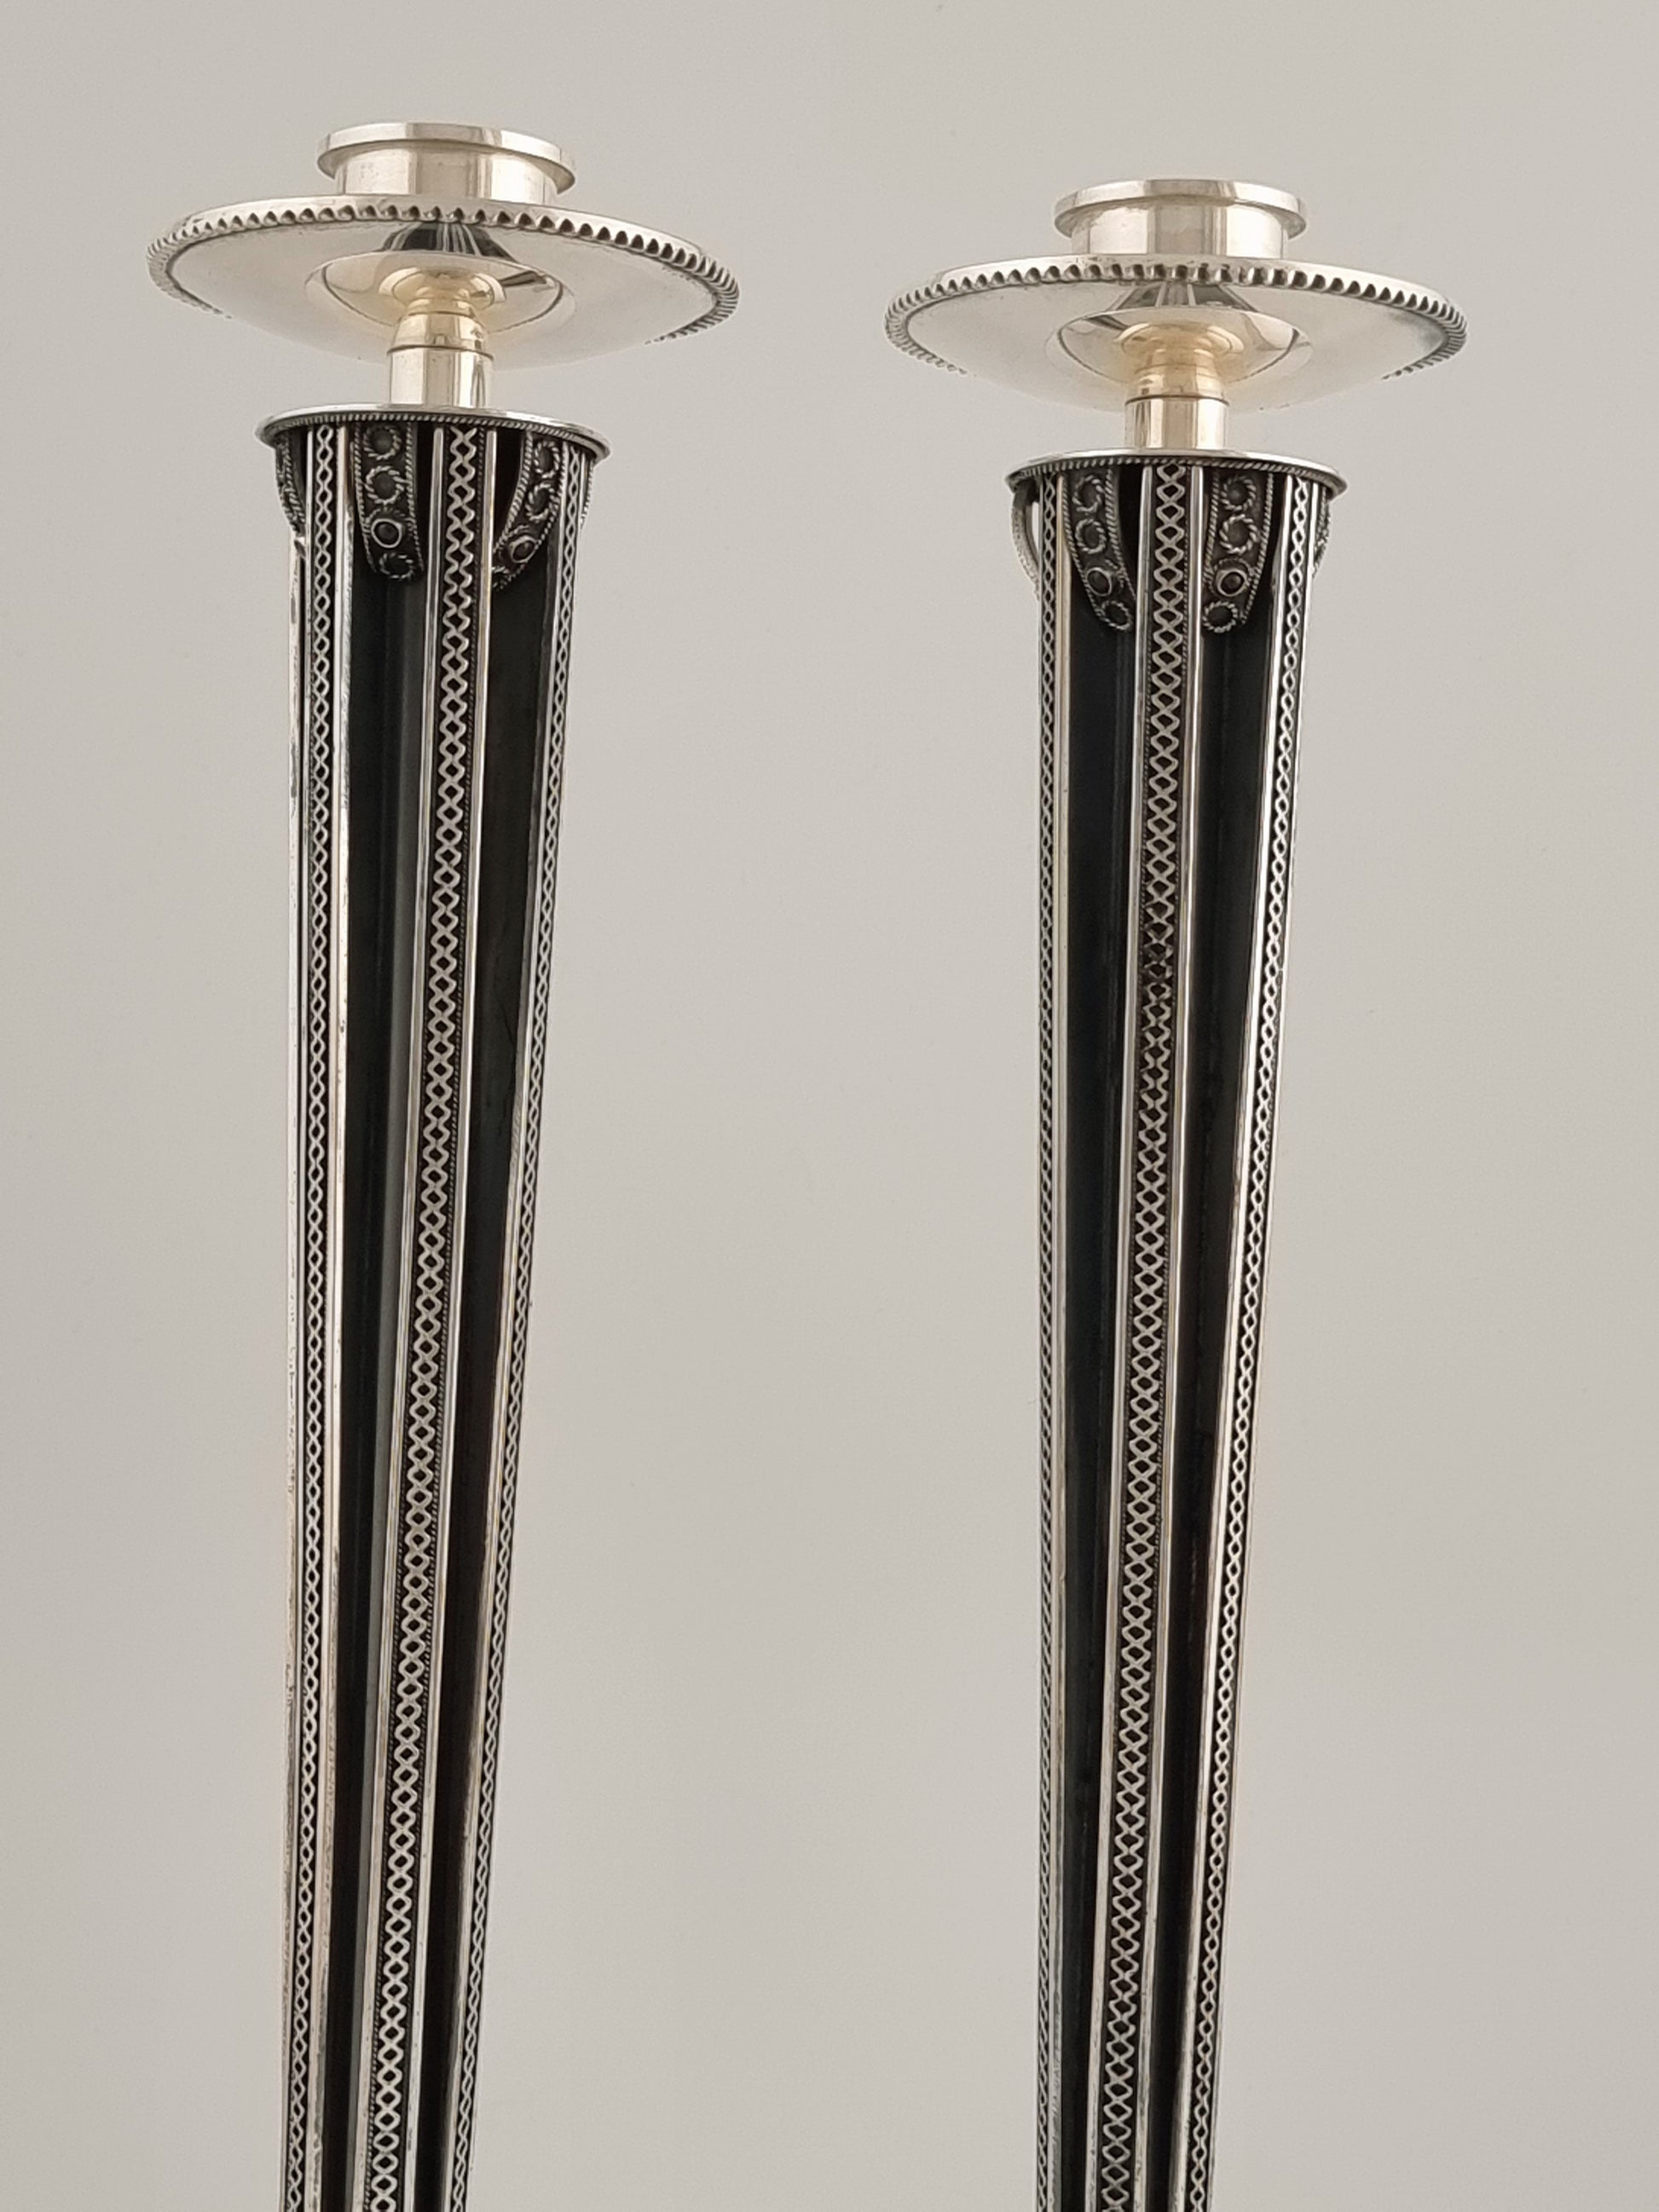 These candlesticks are relatively thin and long, and grow wider towards the top.